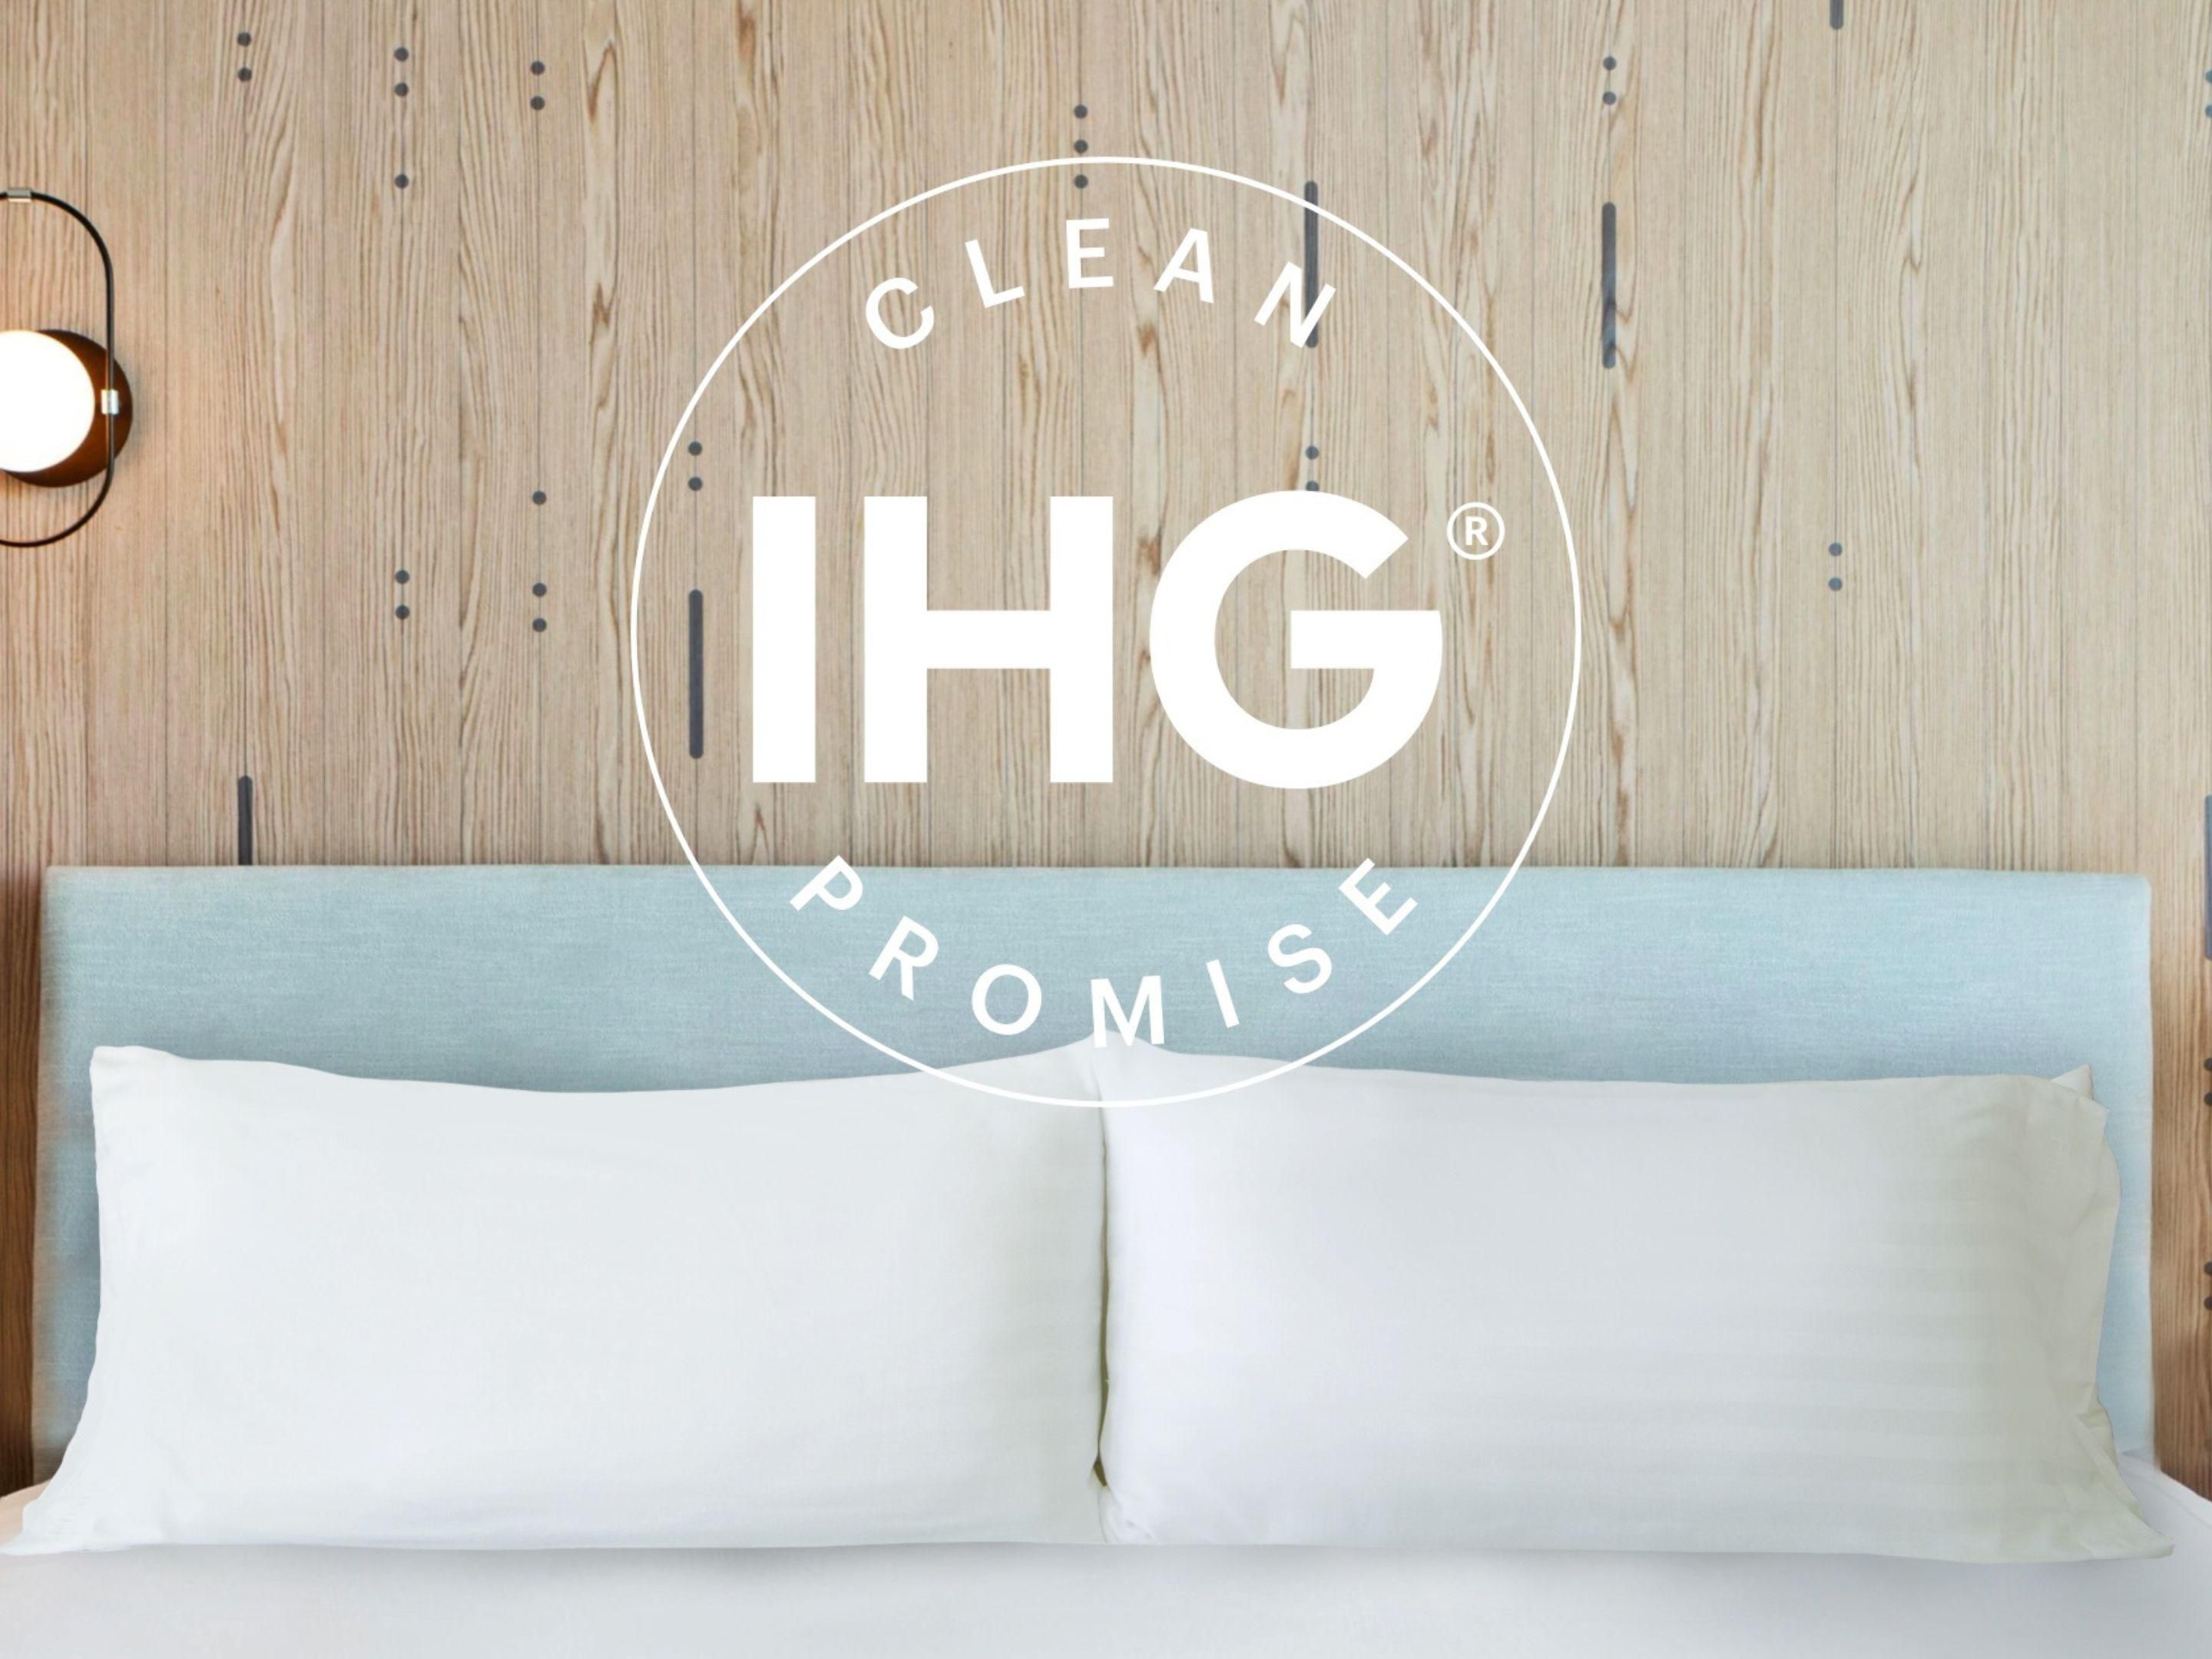 Good isn’t good enough – we’re committed to high levels of cleanliness. That means clean, well-maintained, clutter-free rooms that meet Holiday Inn standards. If this isn’t what you find when you check in at our Johannesburg airport hotel, then we promise to make it right.